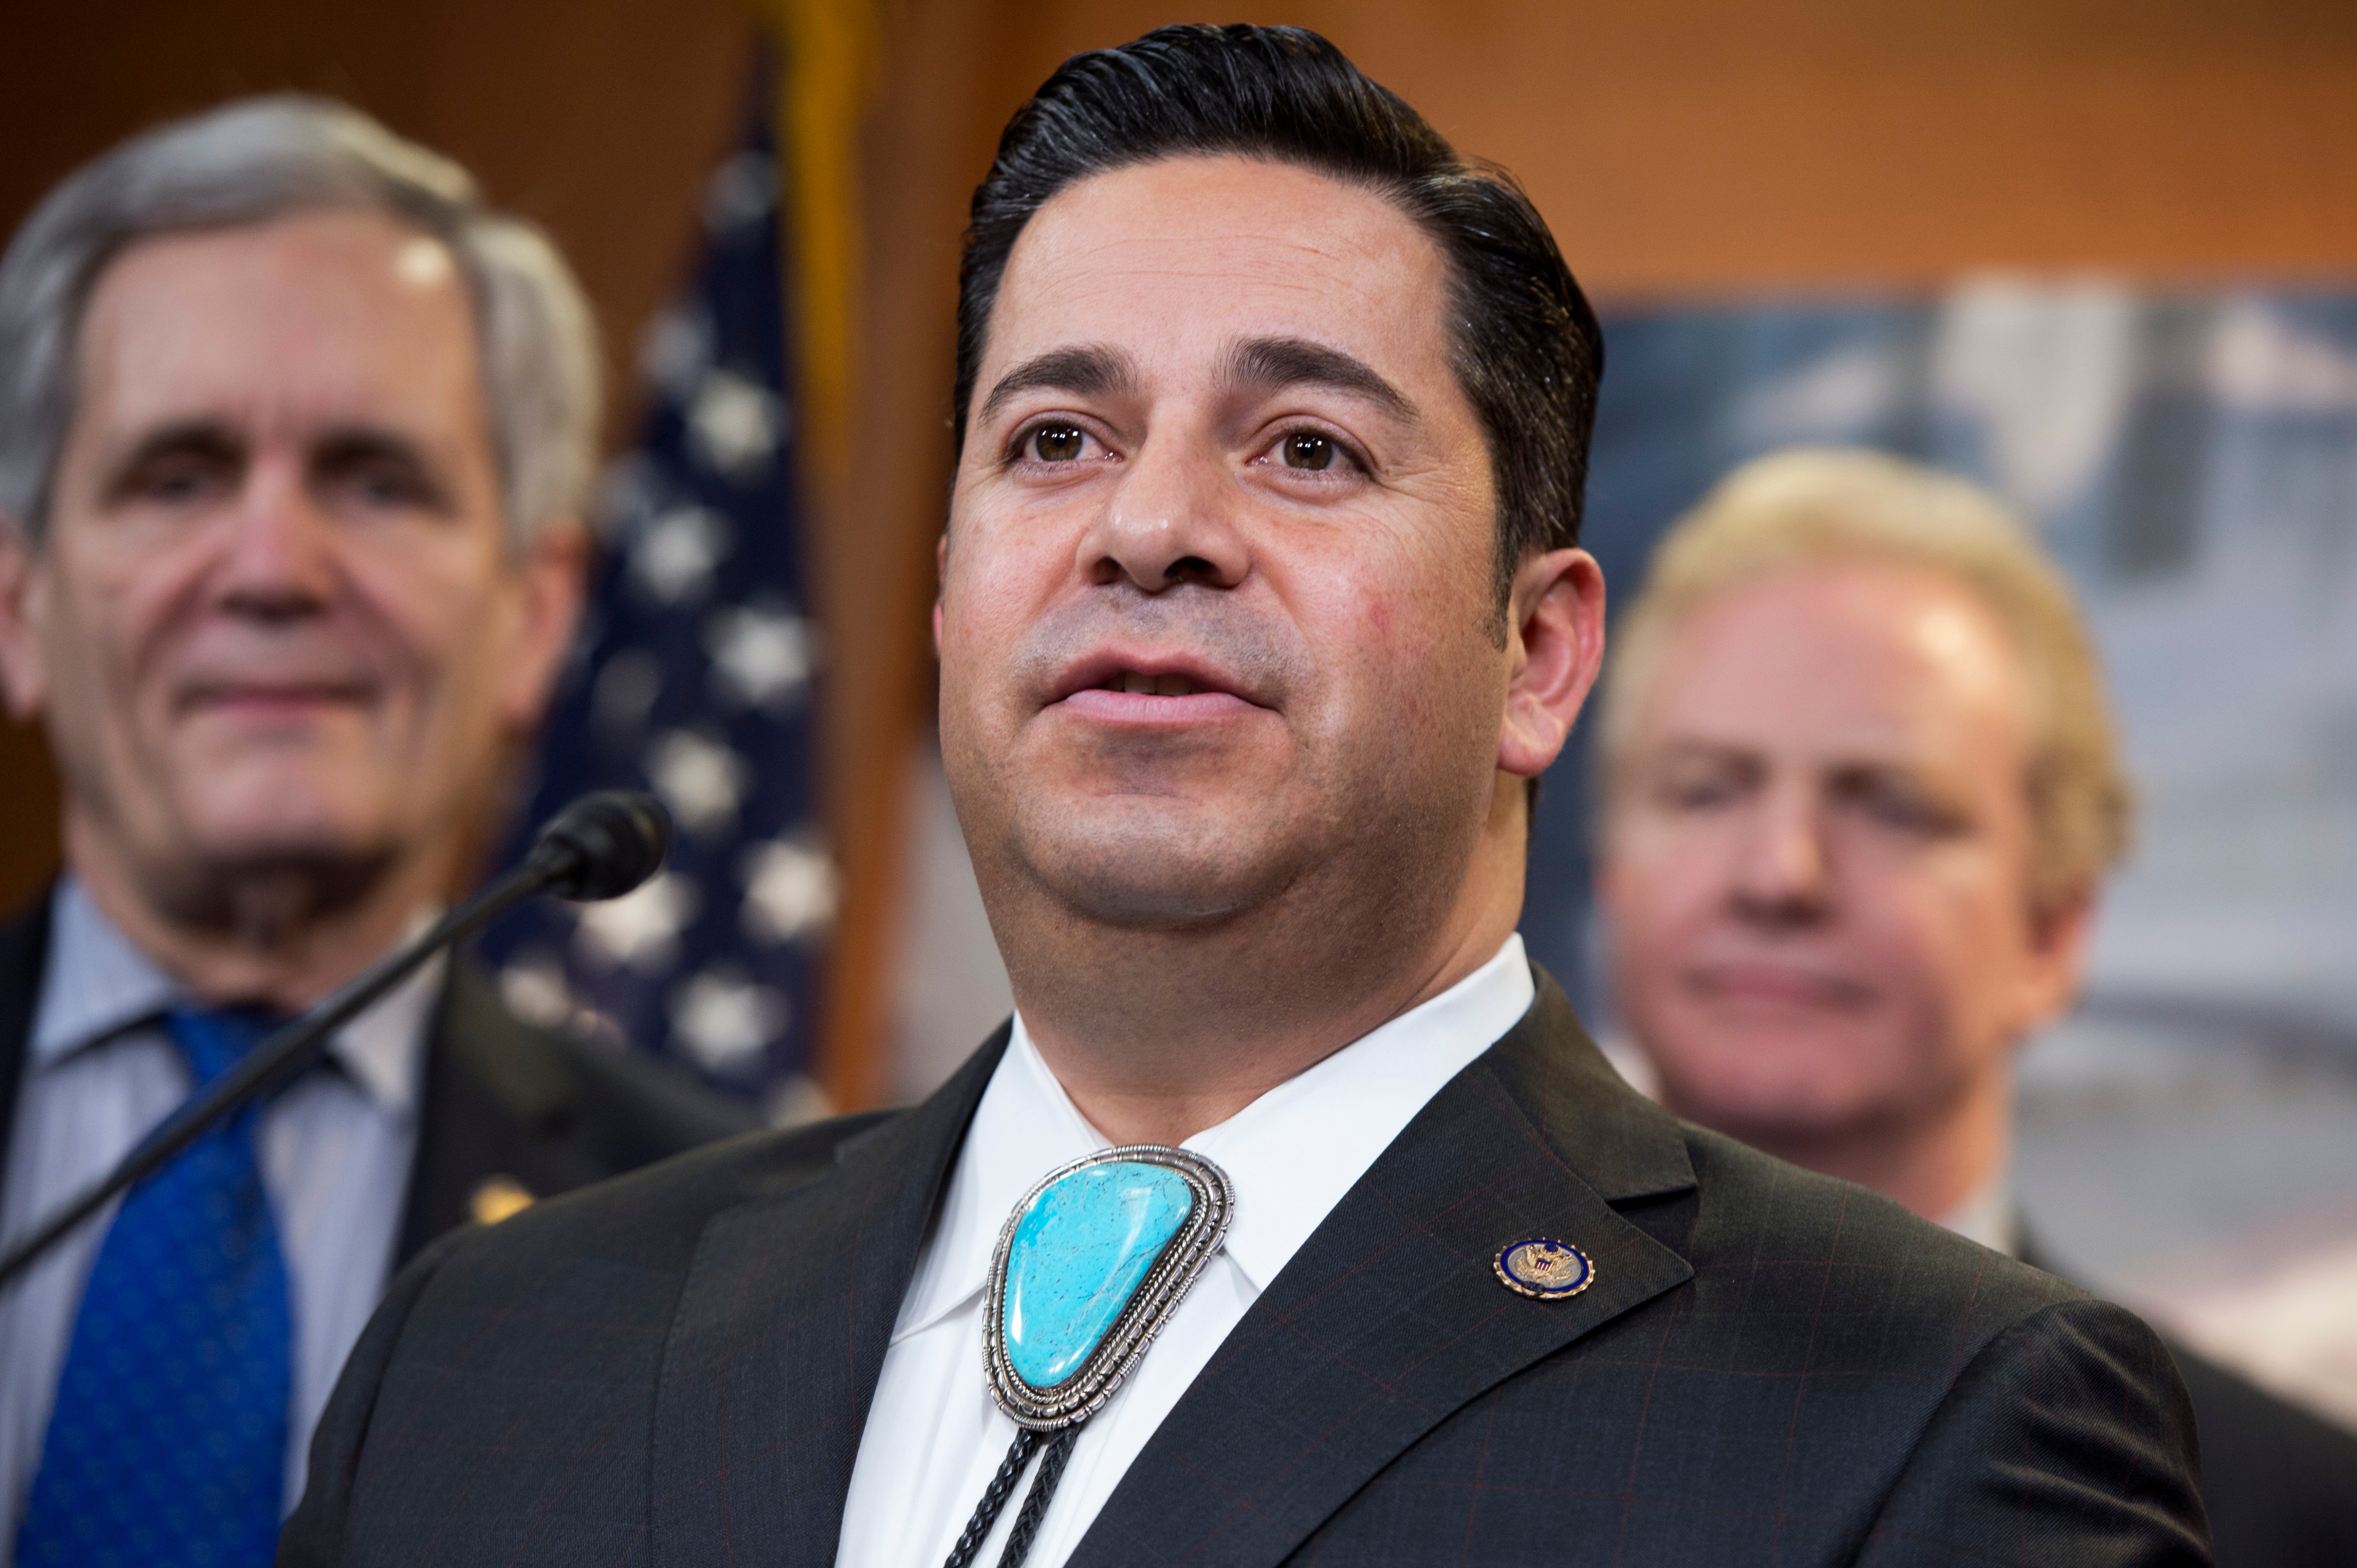 Ben Ray Lujan, D-N.M., speaks during a news conference on Feb. 6, 2014. (Tom Williams—CQ Roll Call/Getty Images)